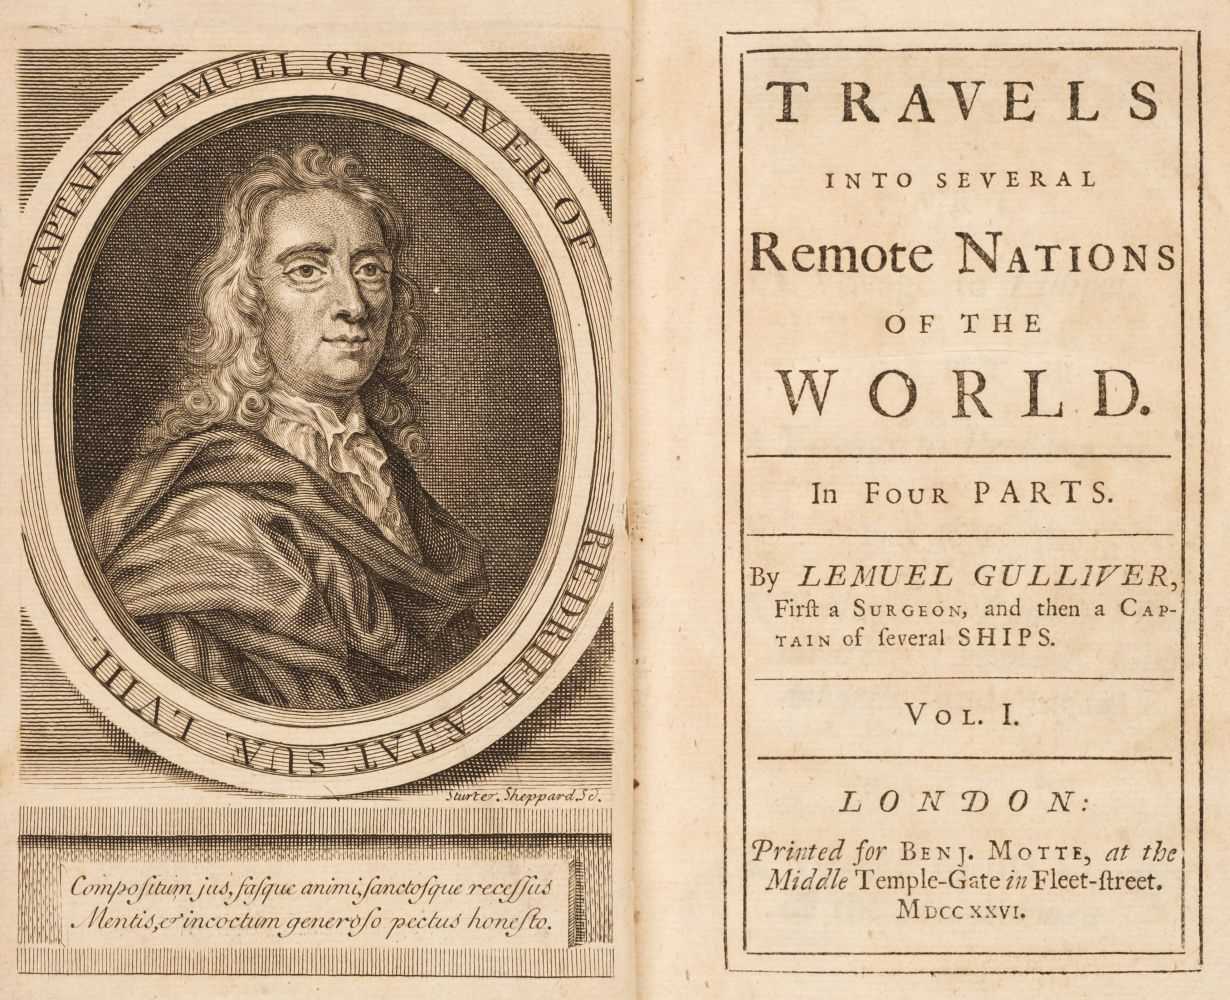 Lot 122 - Swift (Jonathan). Travels into Several Remote Nations of the World, 2 volumes, 2nd edition, 1726